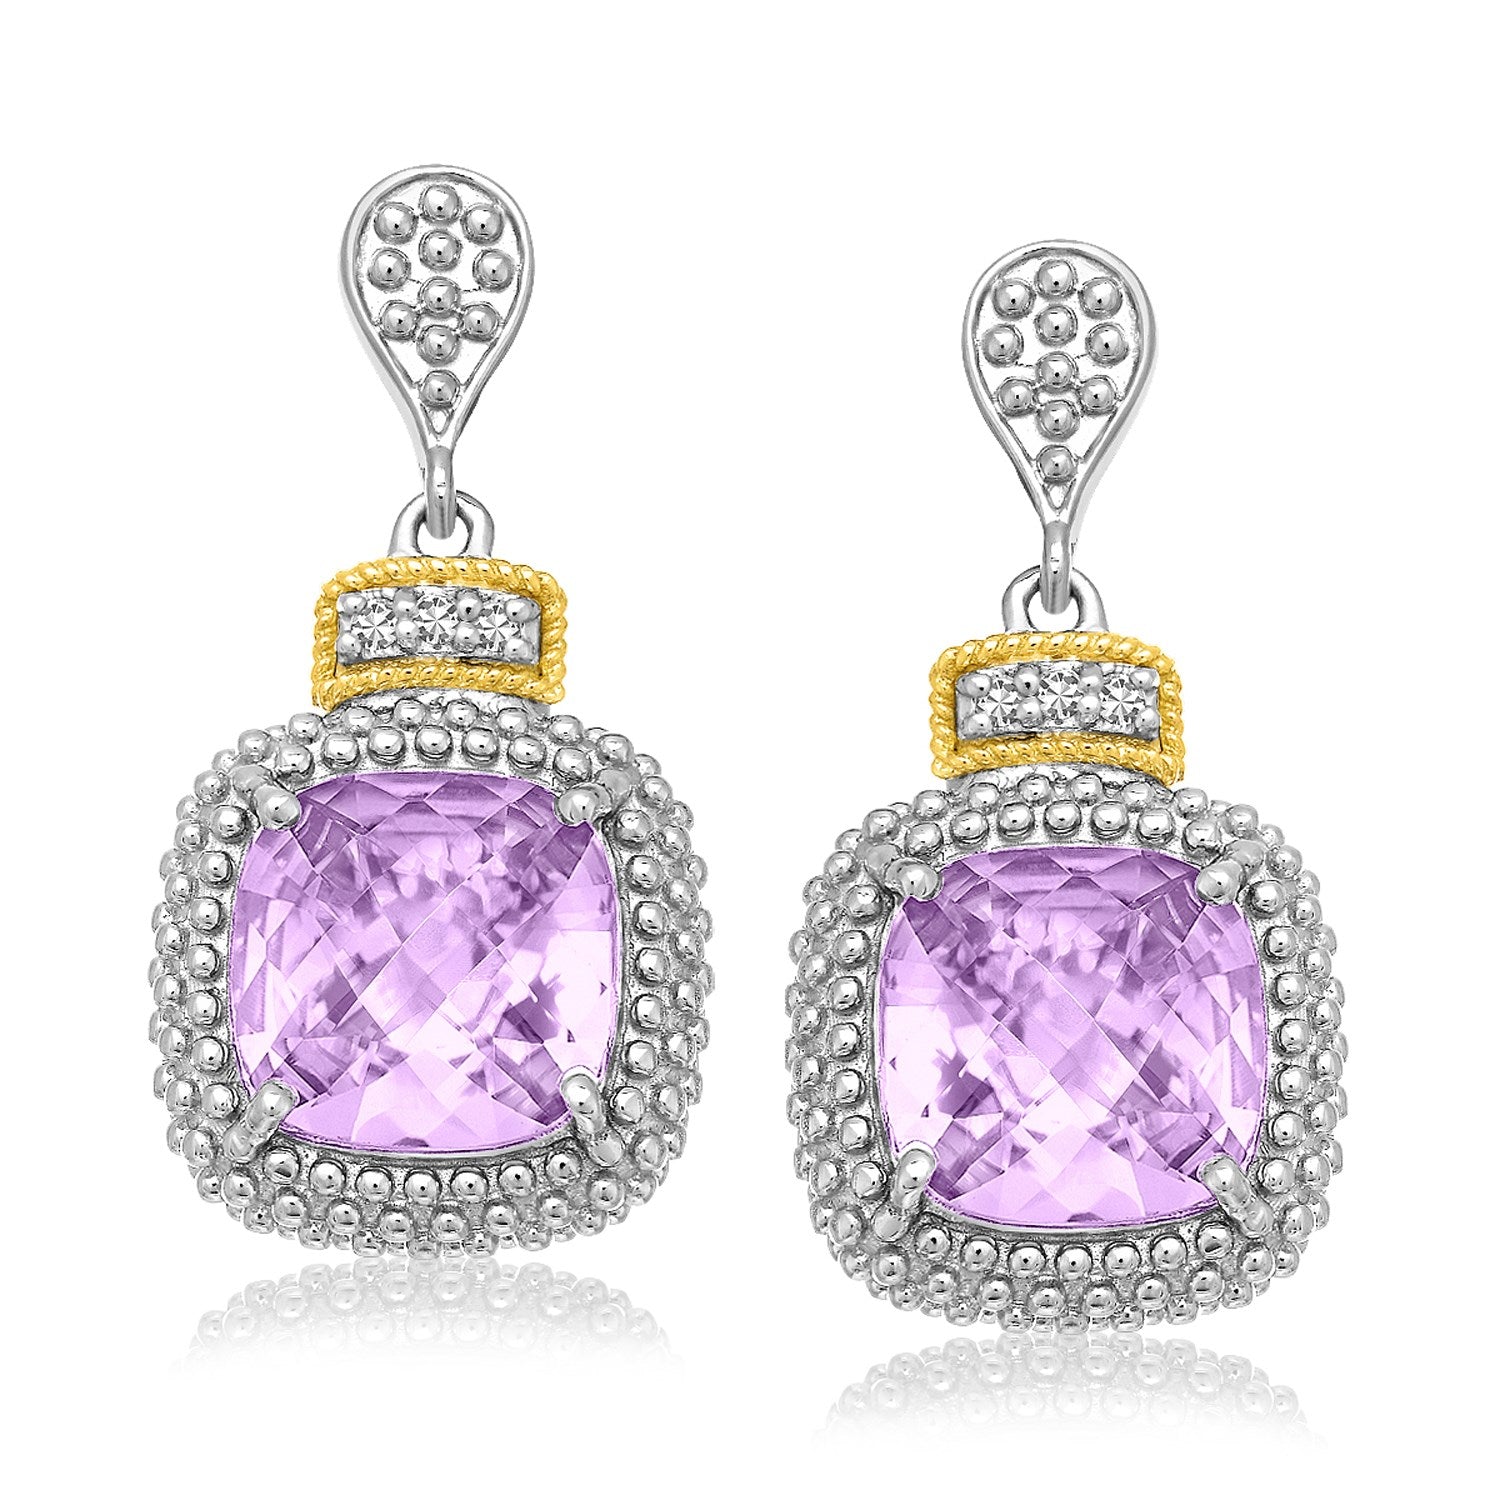 Fancy Cushion Amethyst and Diamond Drop Earrings in 18k Yellow Gold and Sterling Silver